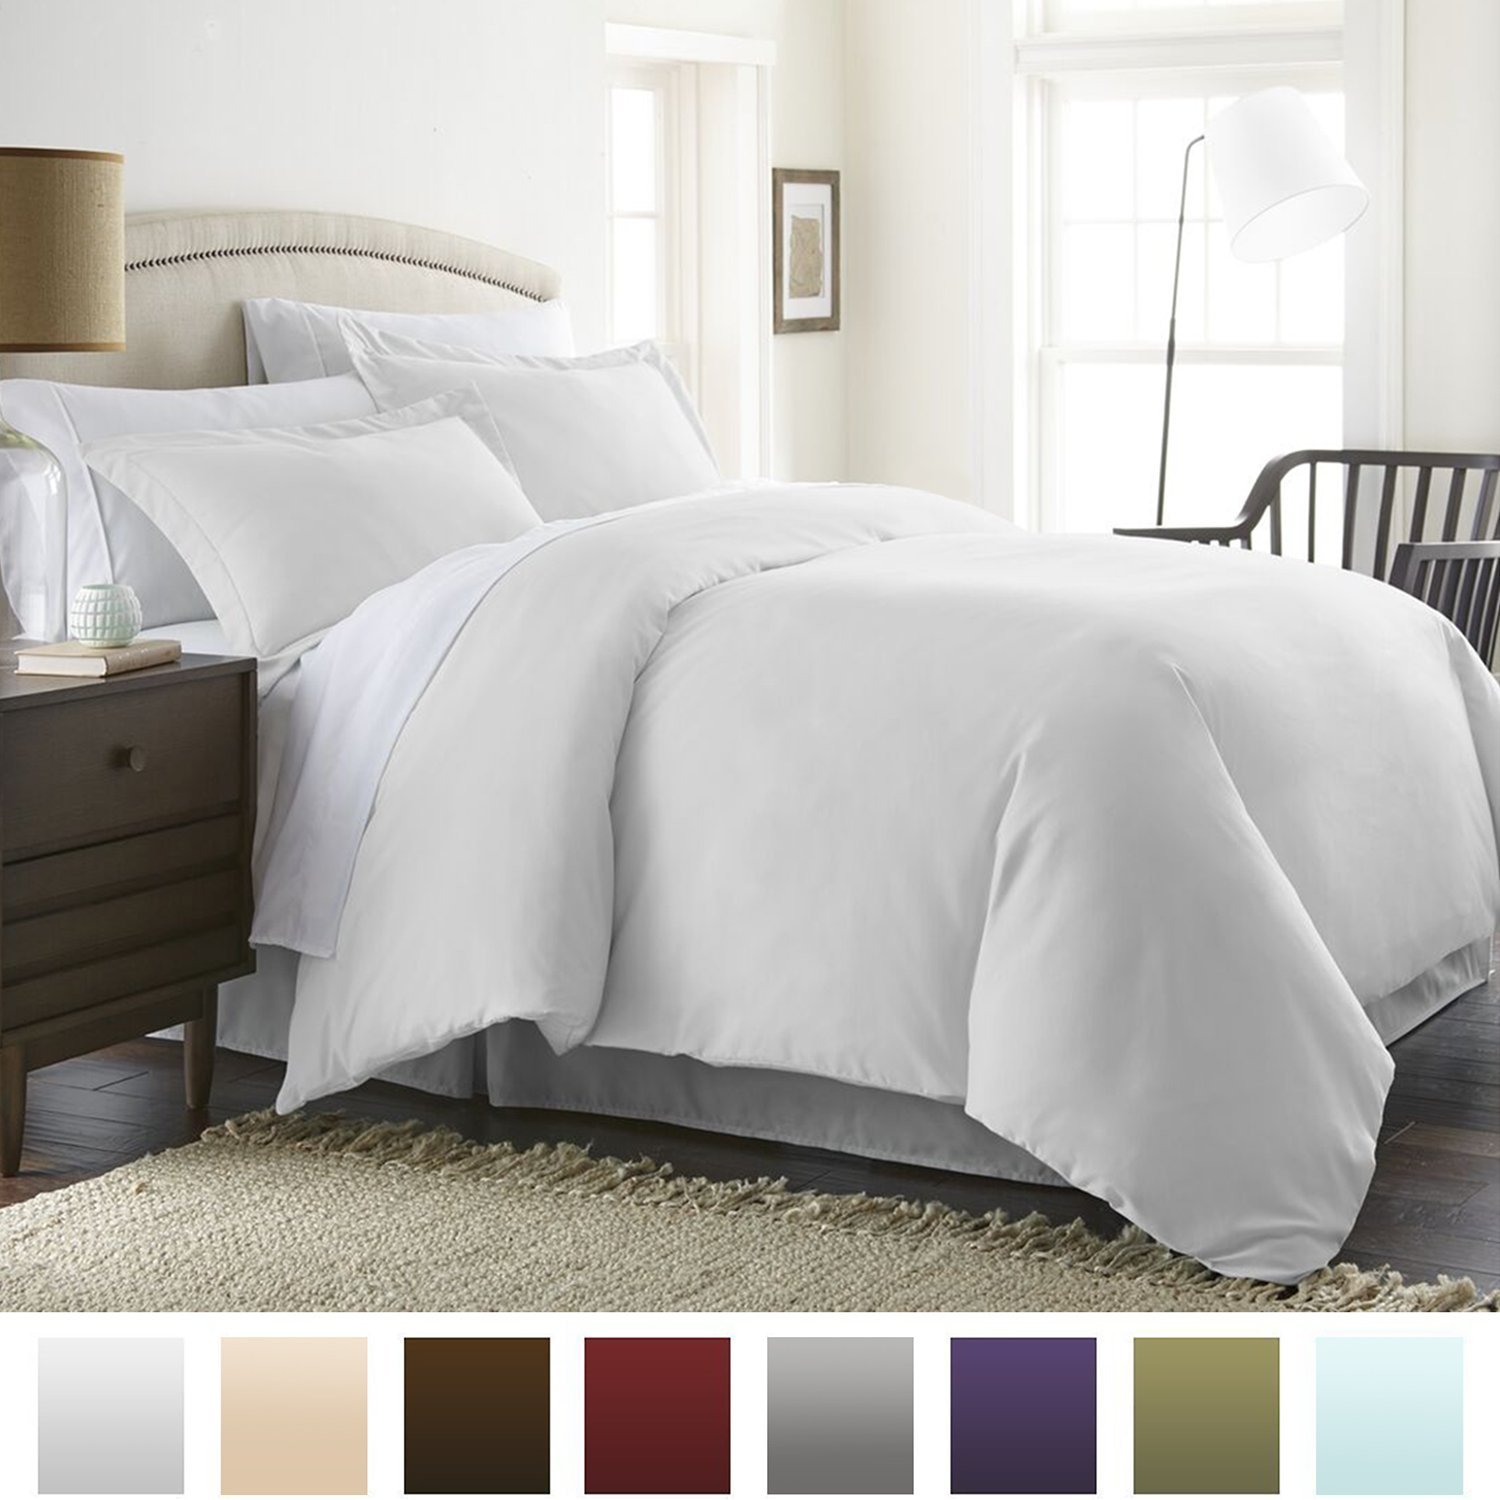 Beckham Hotel Collection Luxury Soft Brushed 1800 Series Microfiber Duvet Cover Set - Hypoallergenic - King/Cal King, White